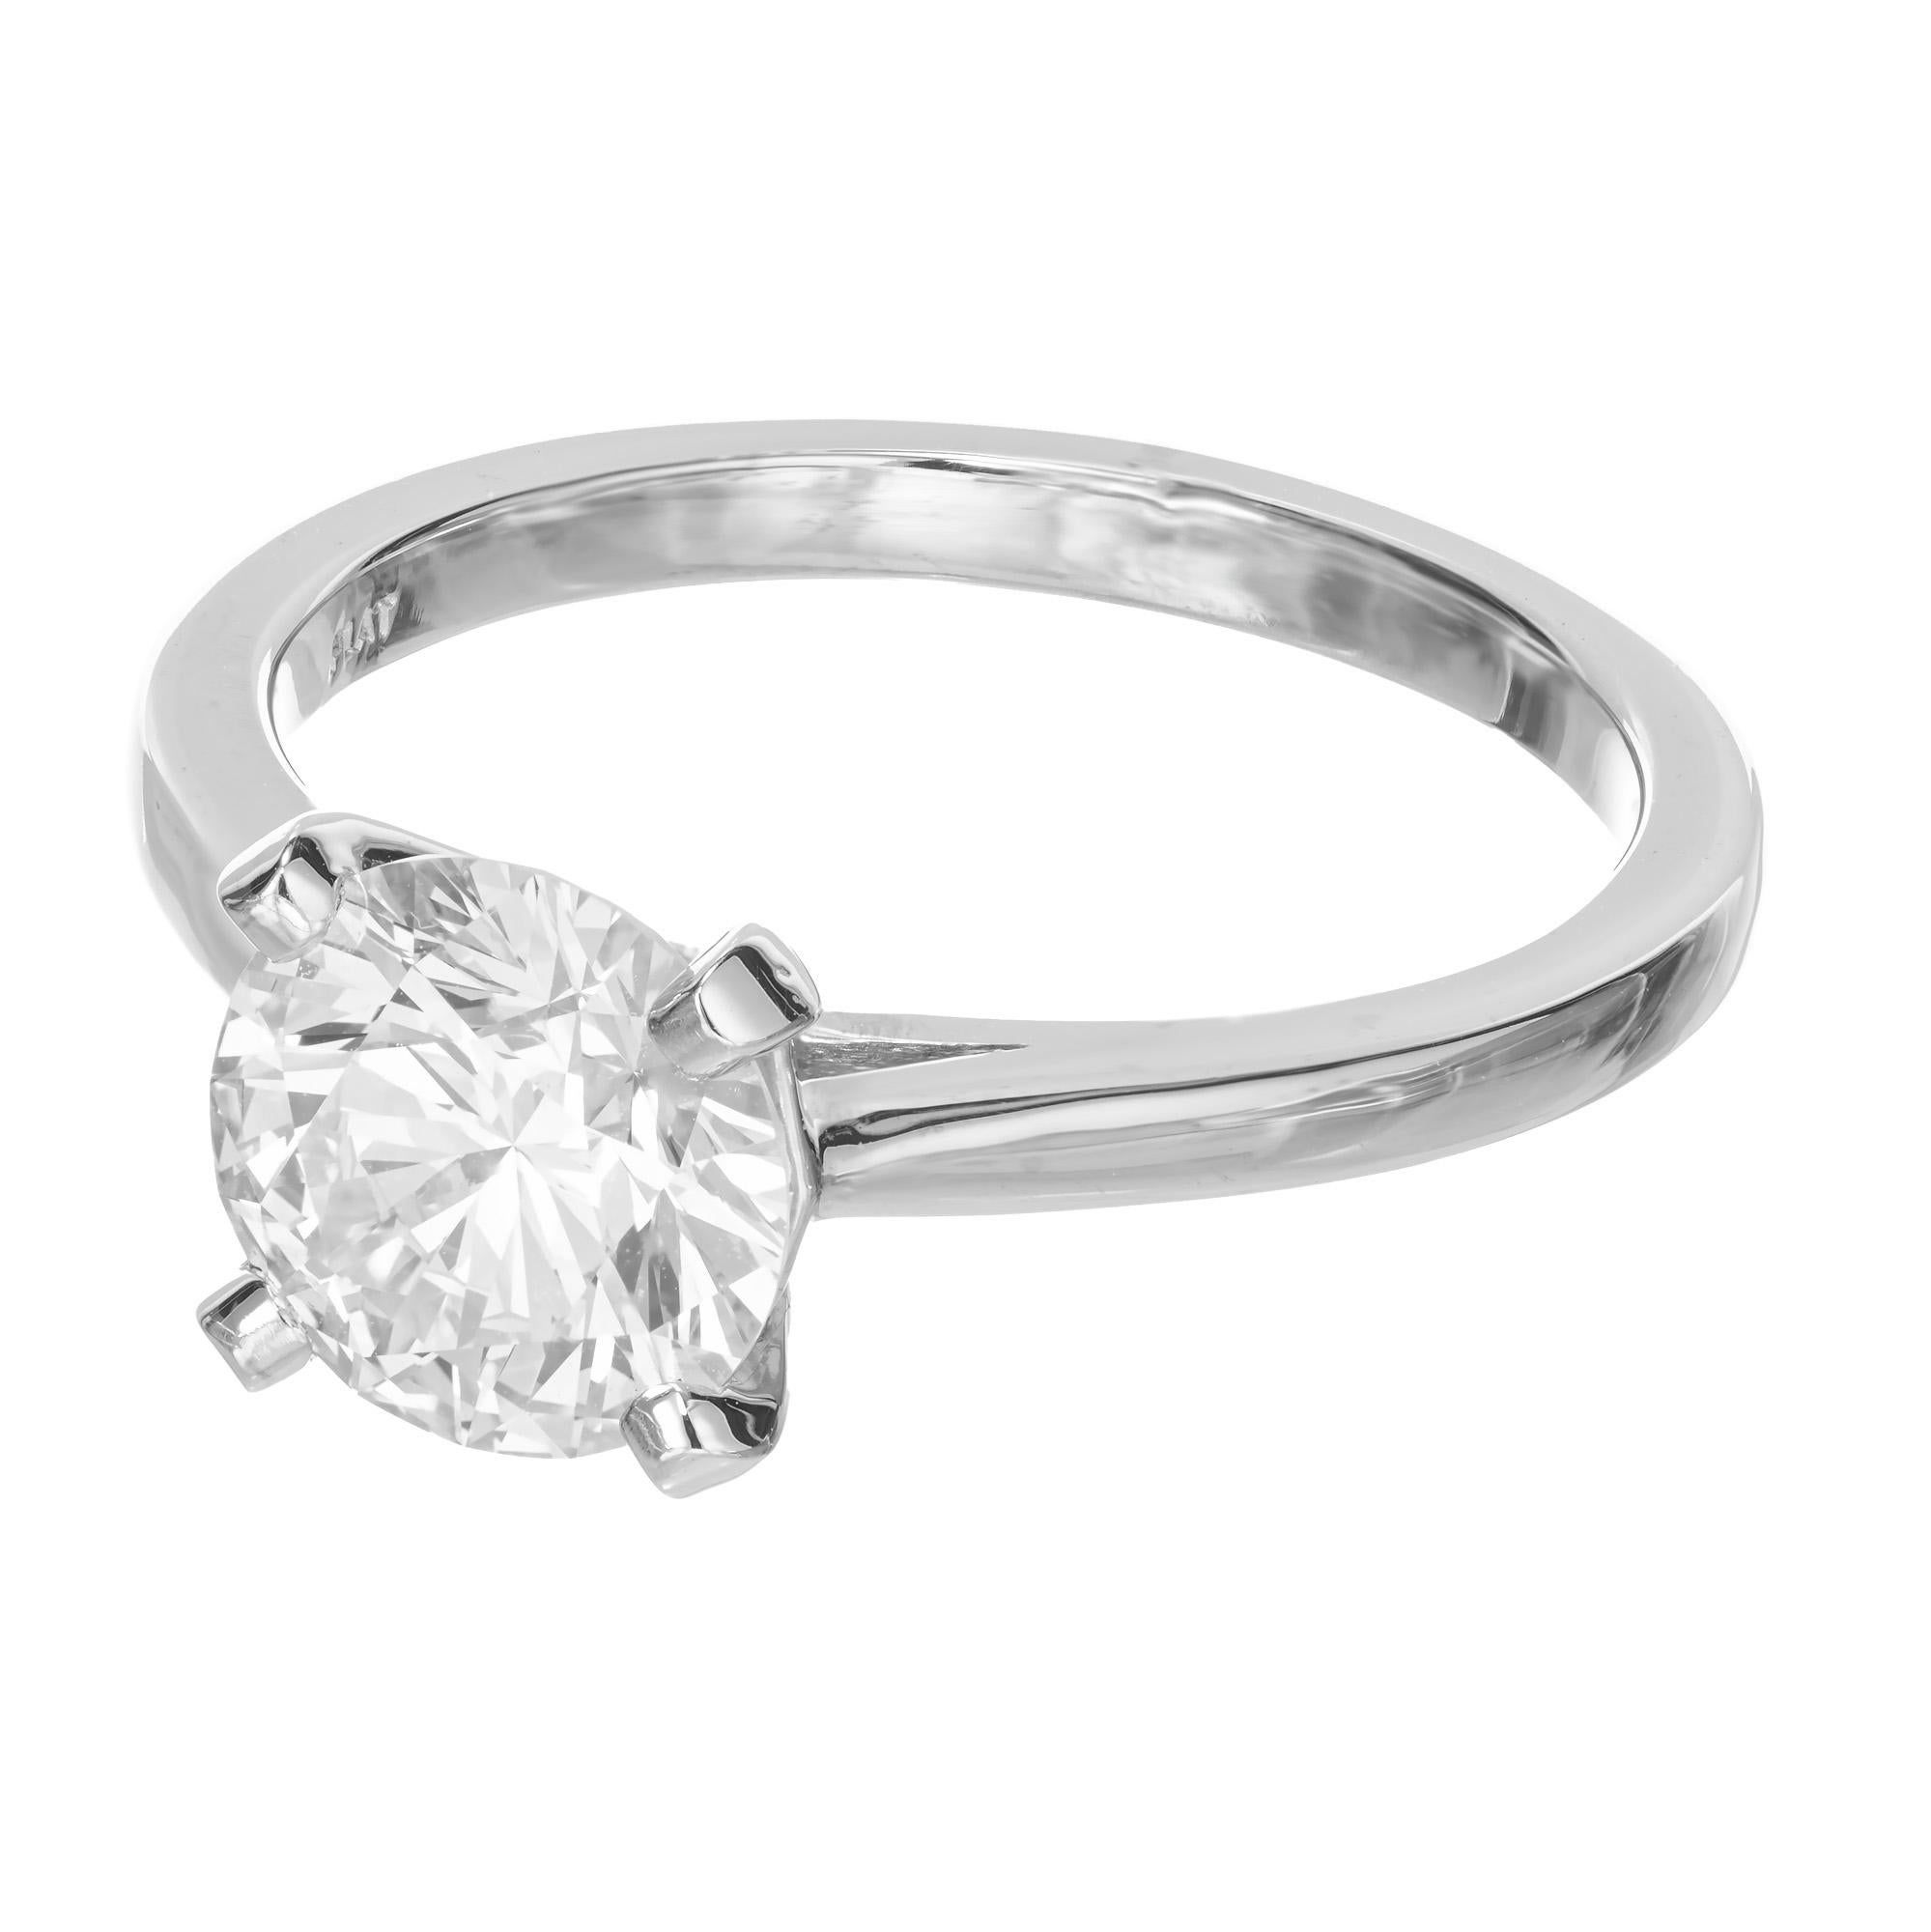 Round Cut Peter Suchy GIA Certified 1.66 Carat Diamond Platinum Solitaire Engagement Ring